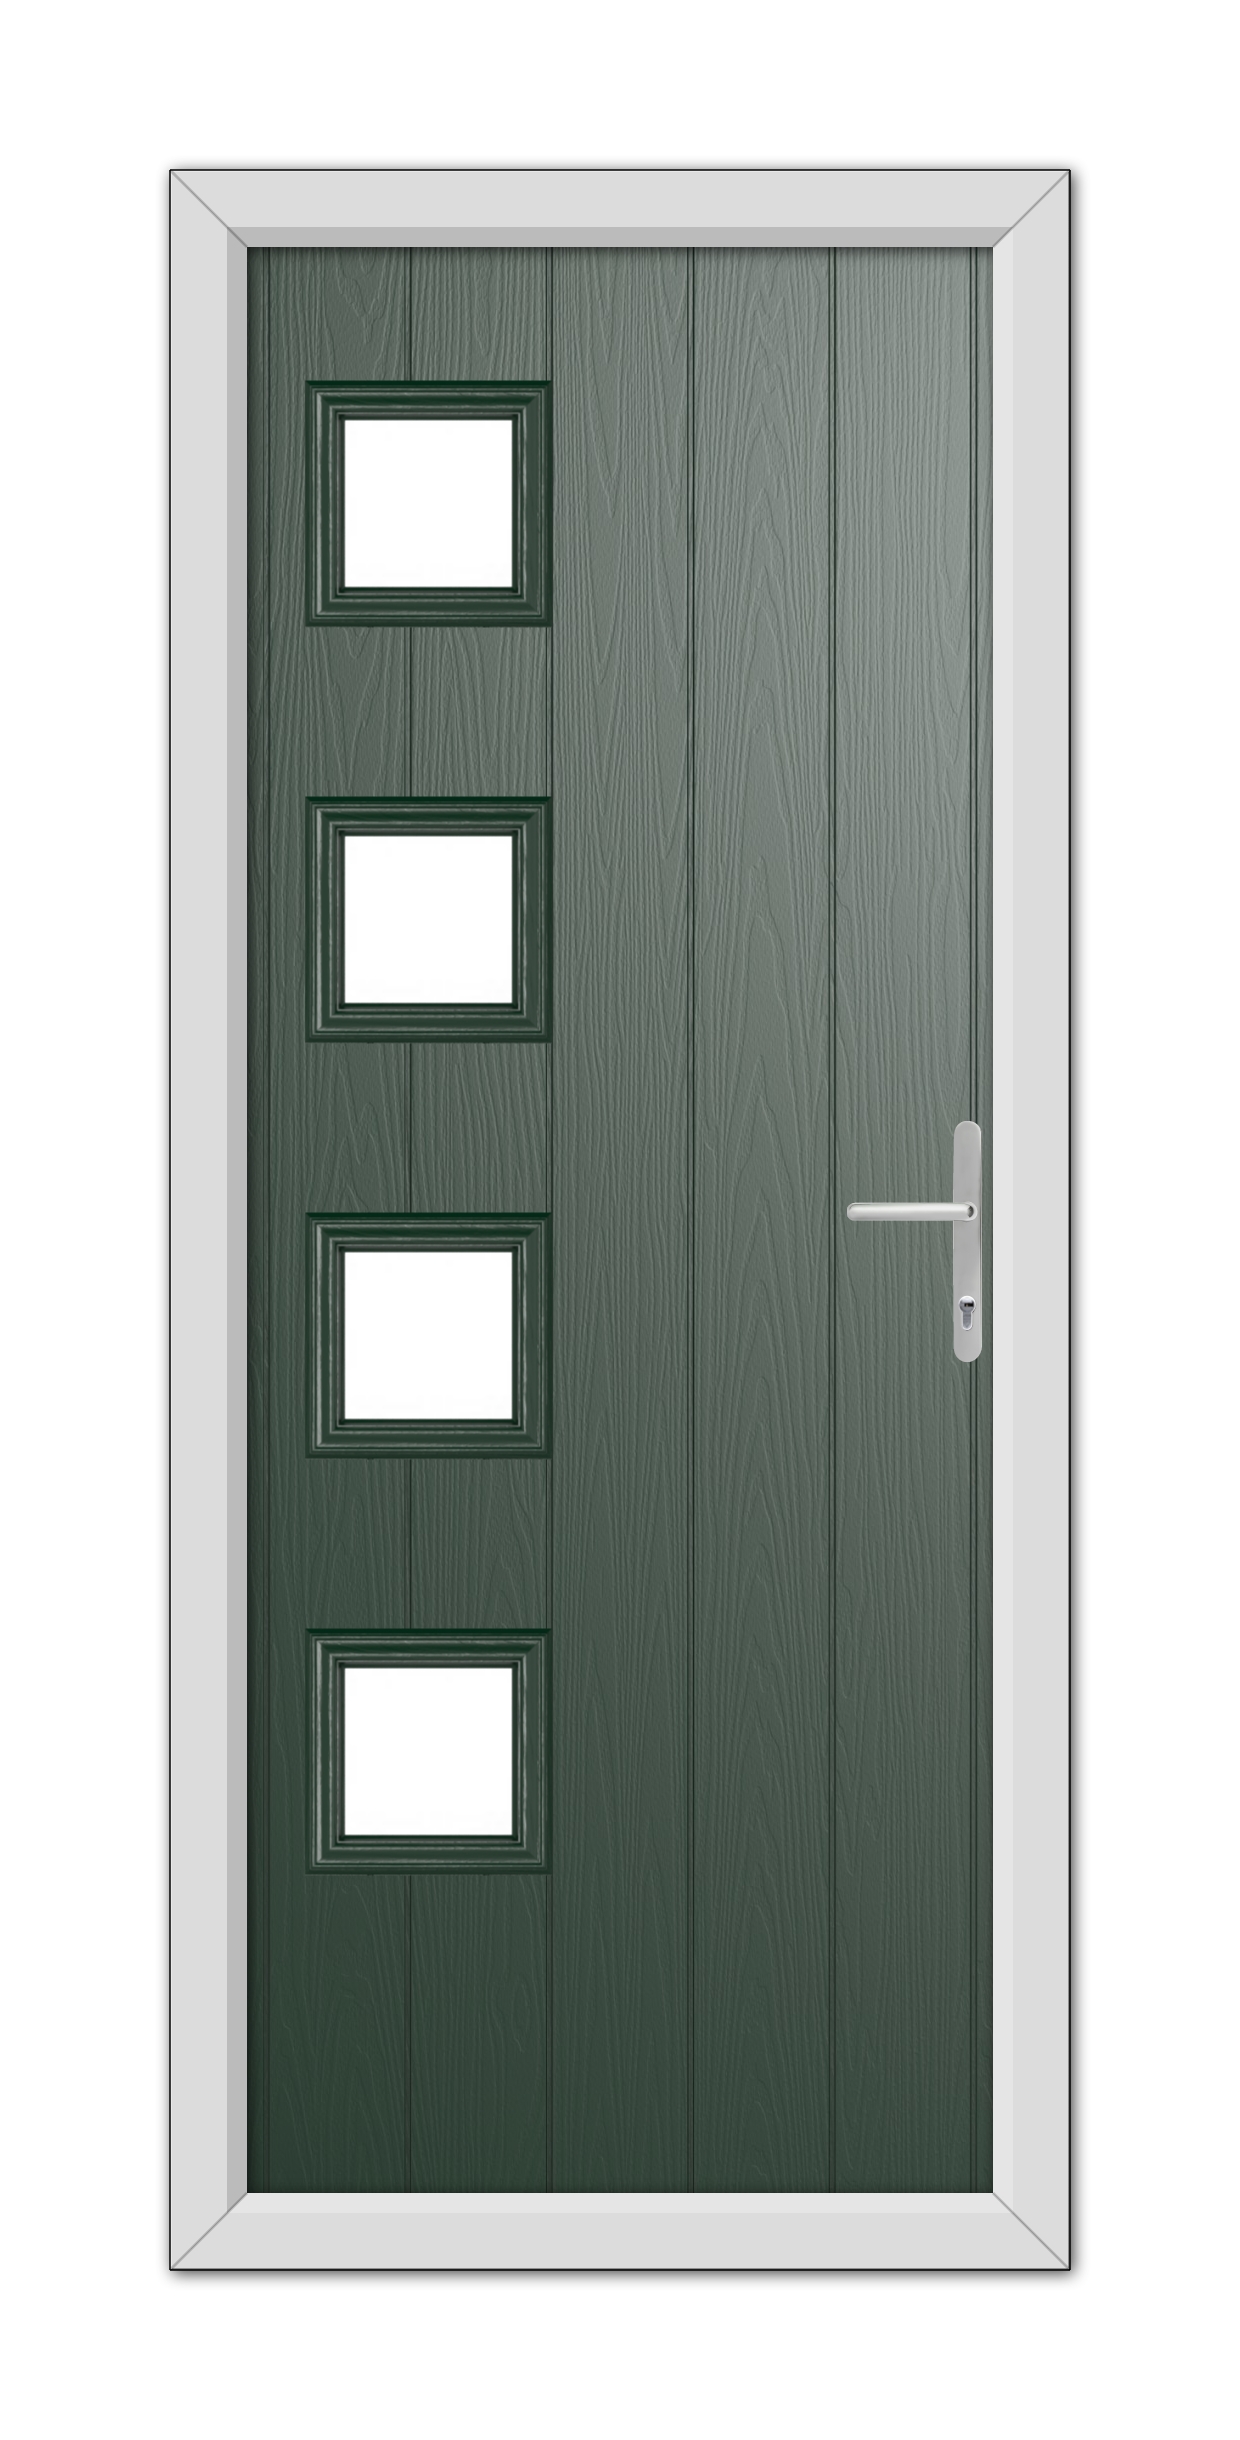 A modern Green Sussex Composite Door 48mm Timber Core featuring four rectangular glass panels arranged vertically, with a white frame and a silver handle.